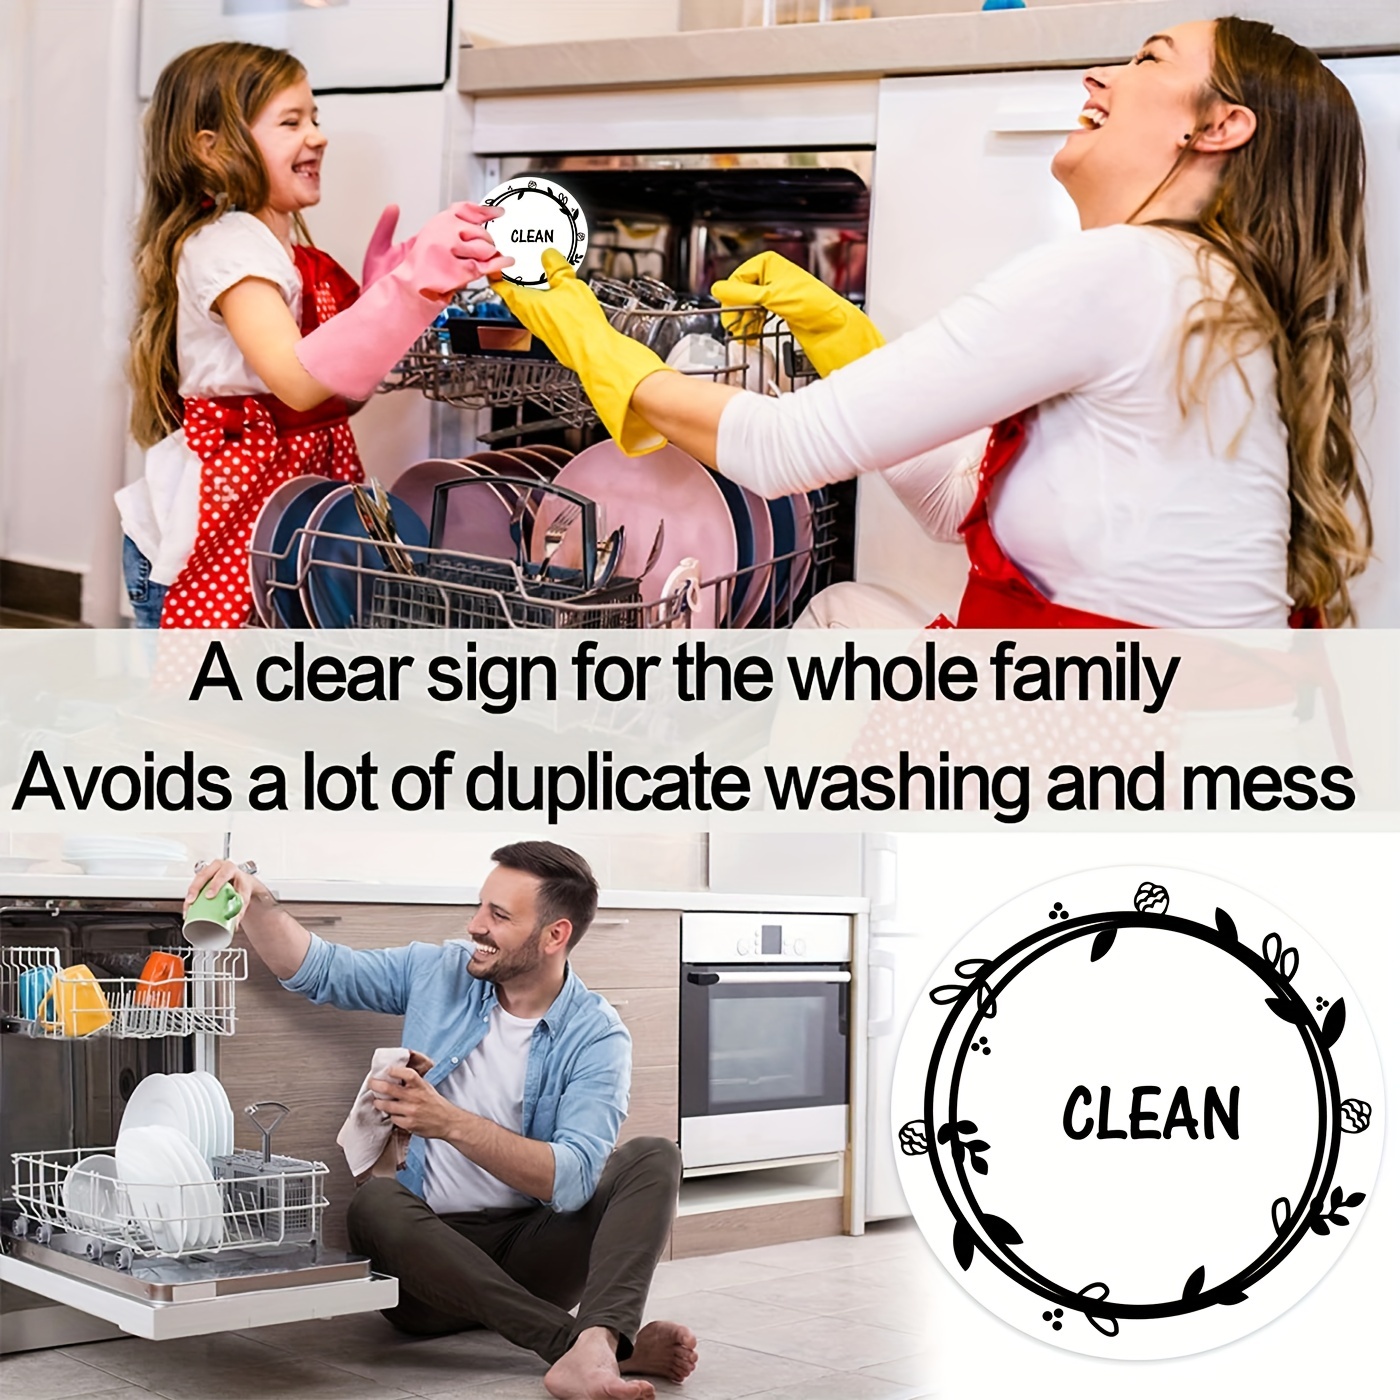 Dishwasher Clean Dirty Magnet Sign  Clean dishwasher, Clean dirty  dishwasher magnet, Clean dirty